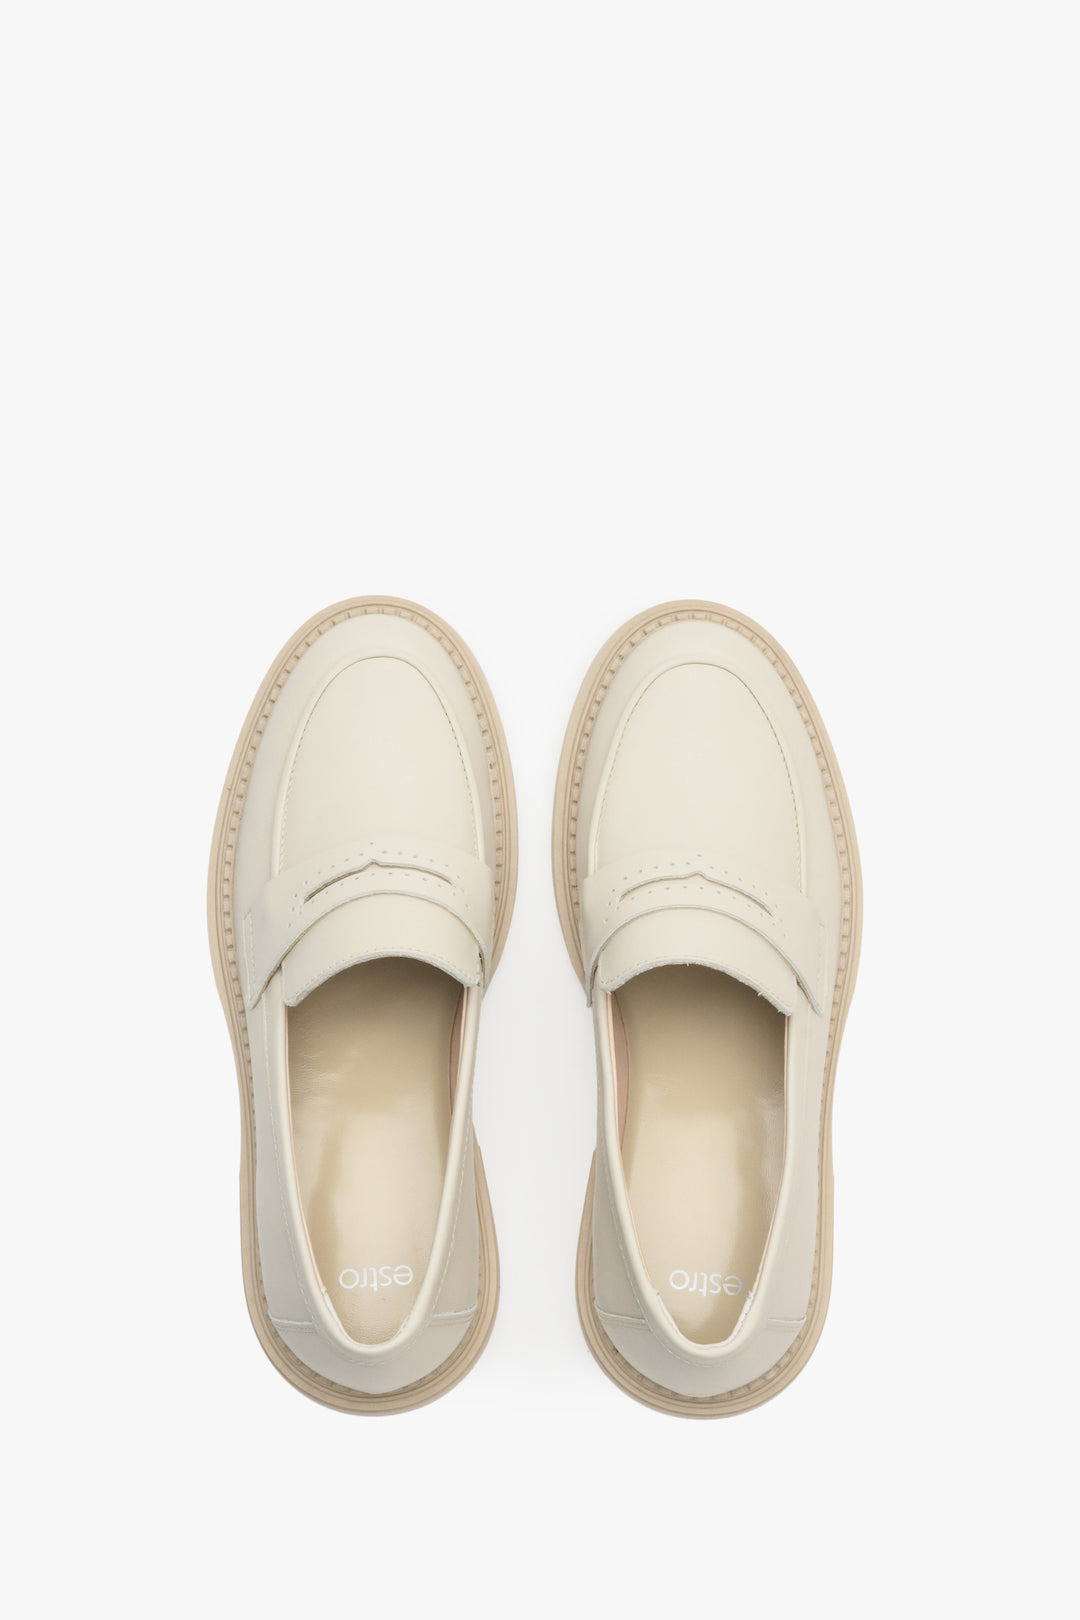 Beige leather loafers for women Estro - presentation of the model from above.